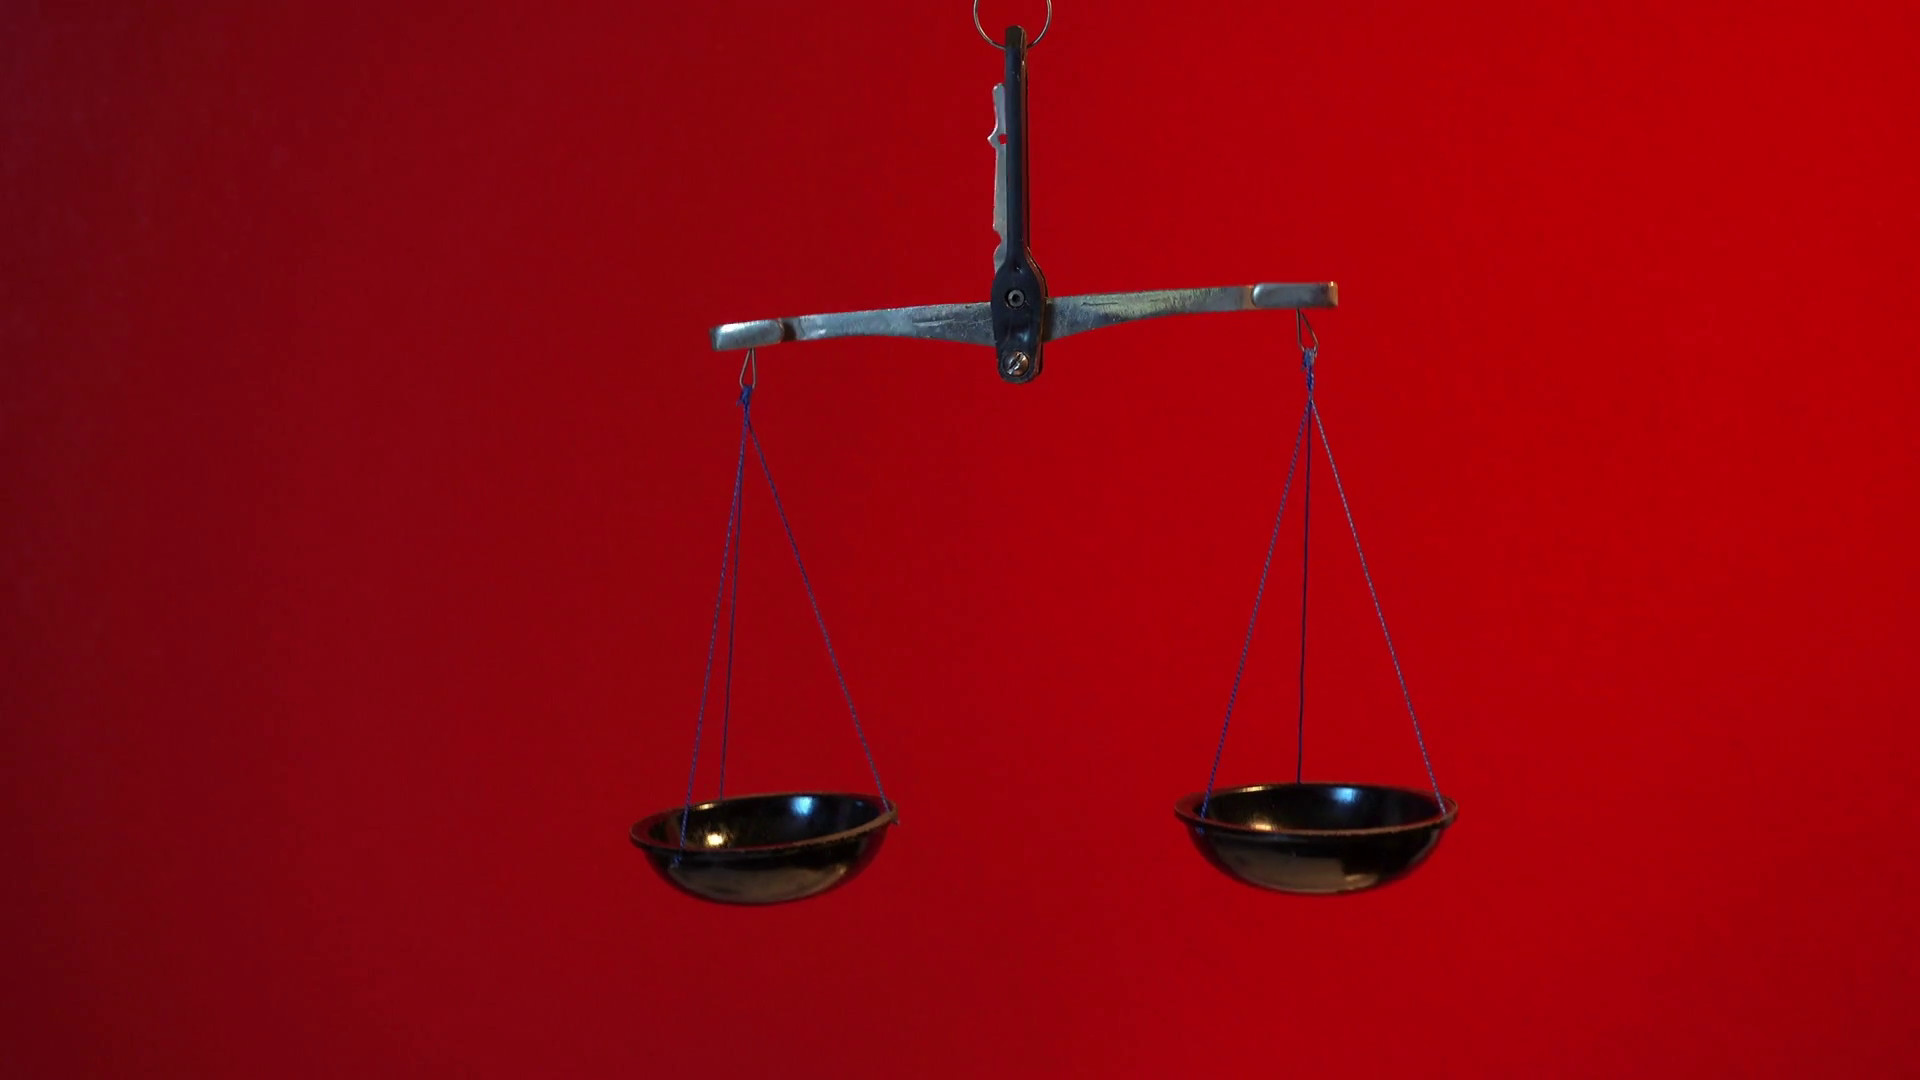 1920x1080 Vintage scales with a metal handle and black bowls.Scales evenly swinging  up and down. Scales on a red background. Symbol of justice.